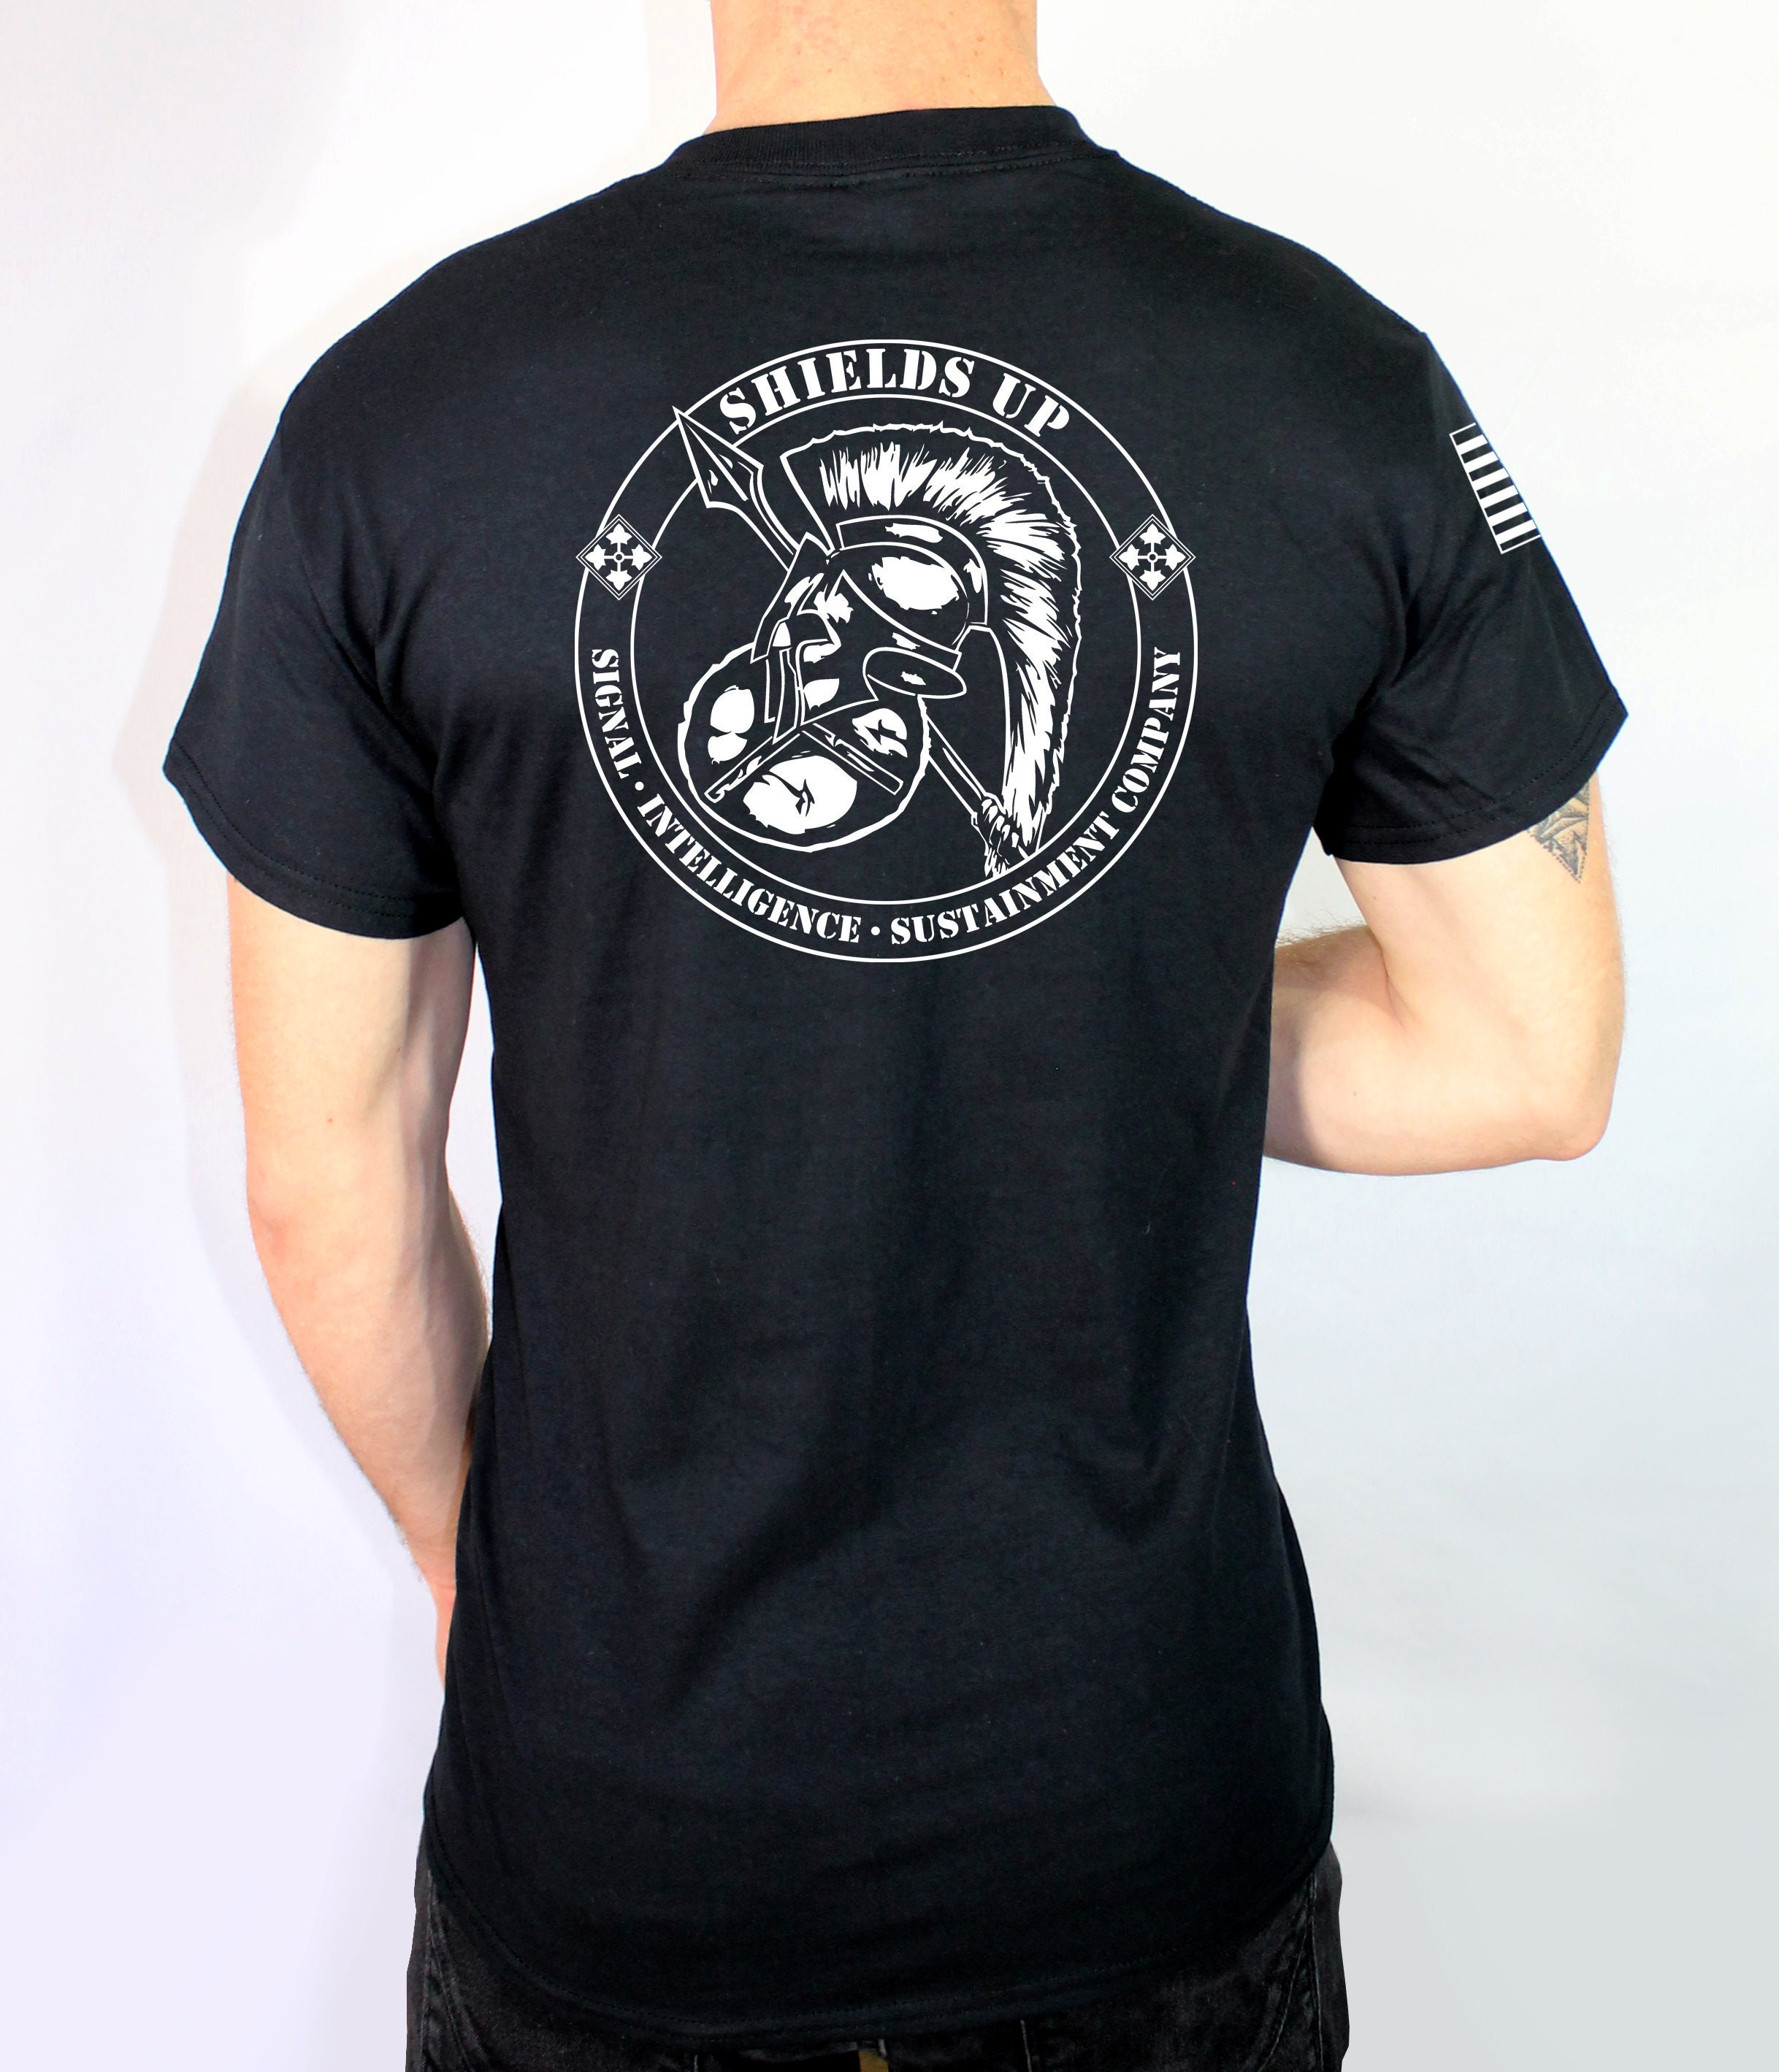 Unisex Black PT Shirt. This Shirt is Approved for PT FREE - Etsy